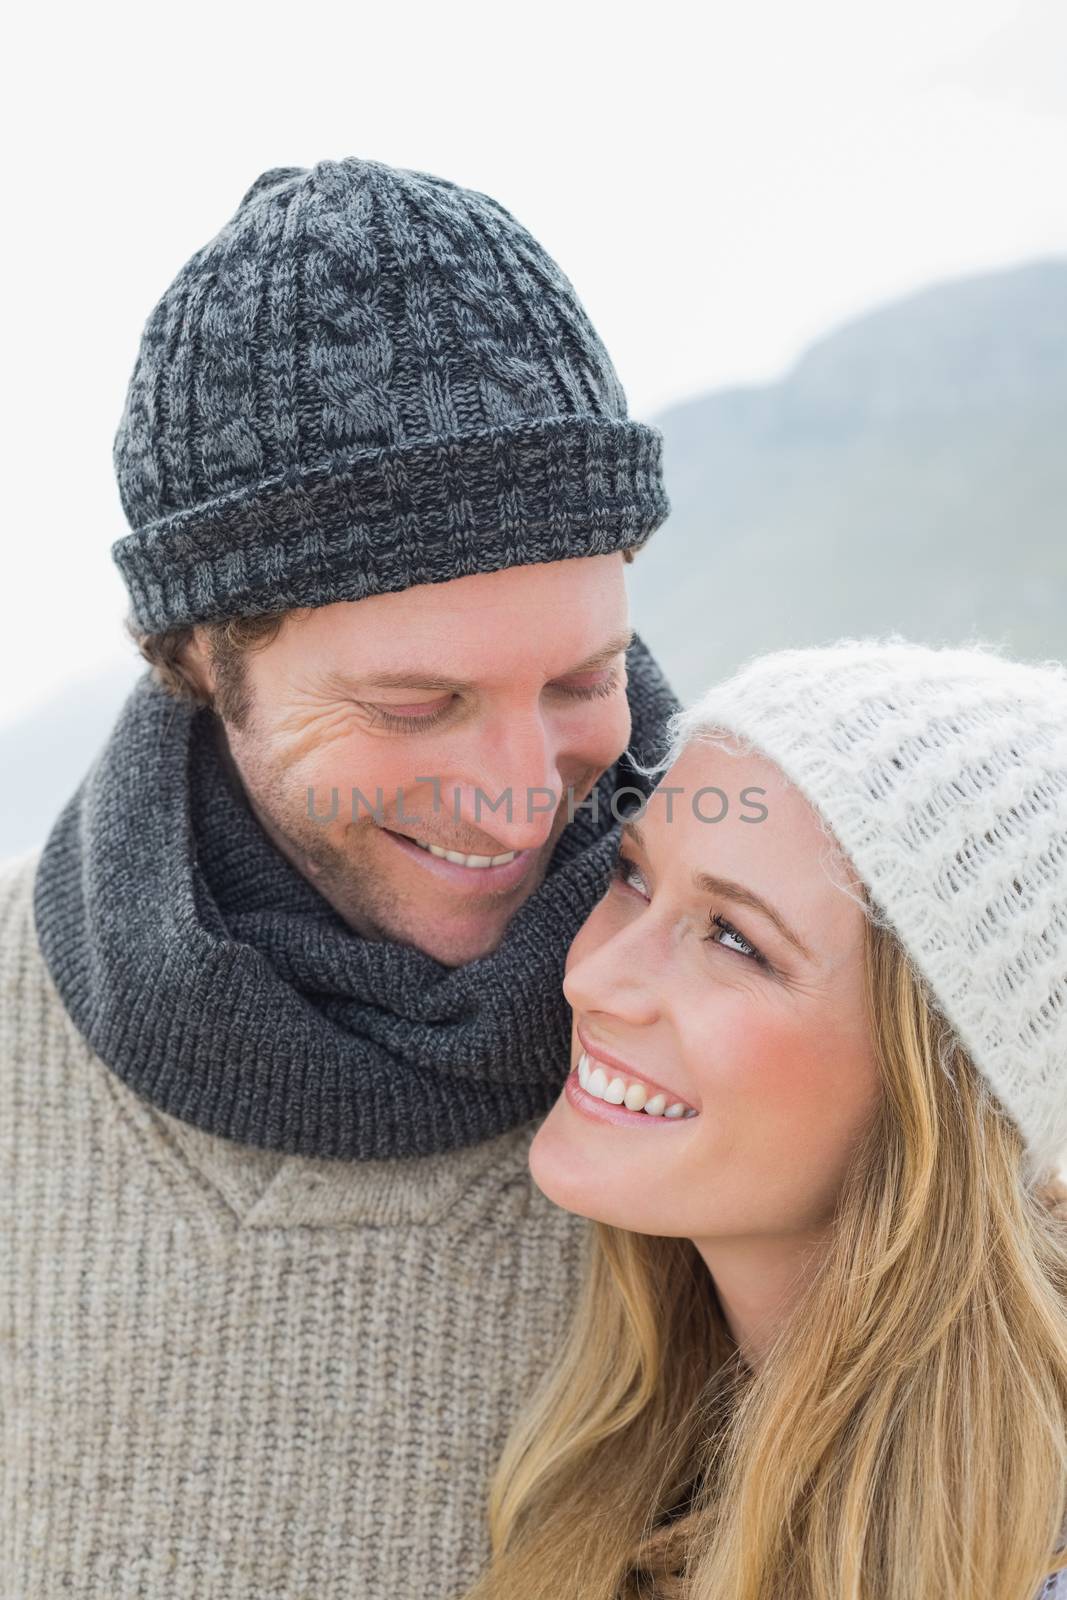 Closeup of a romantic young couple in warm clothing outdoors